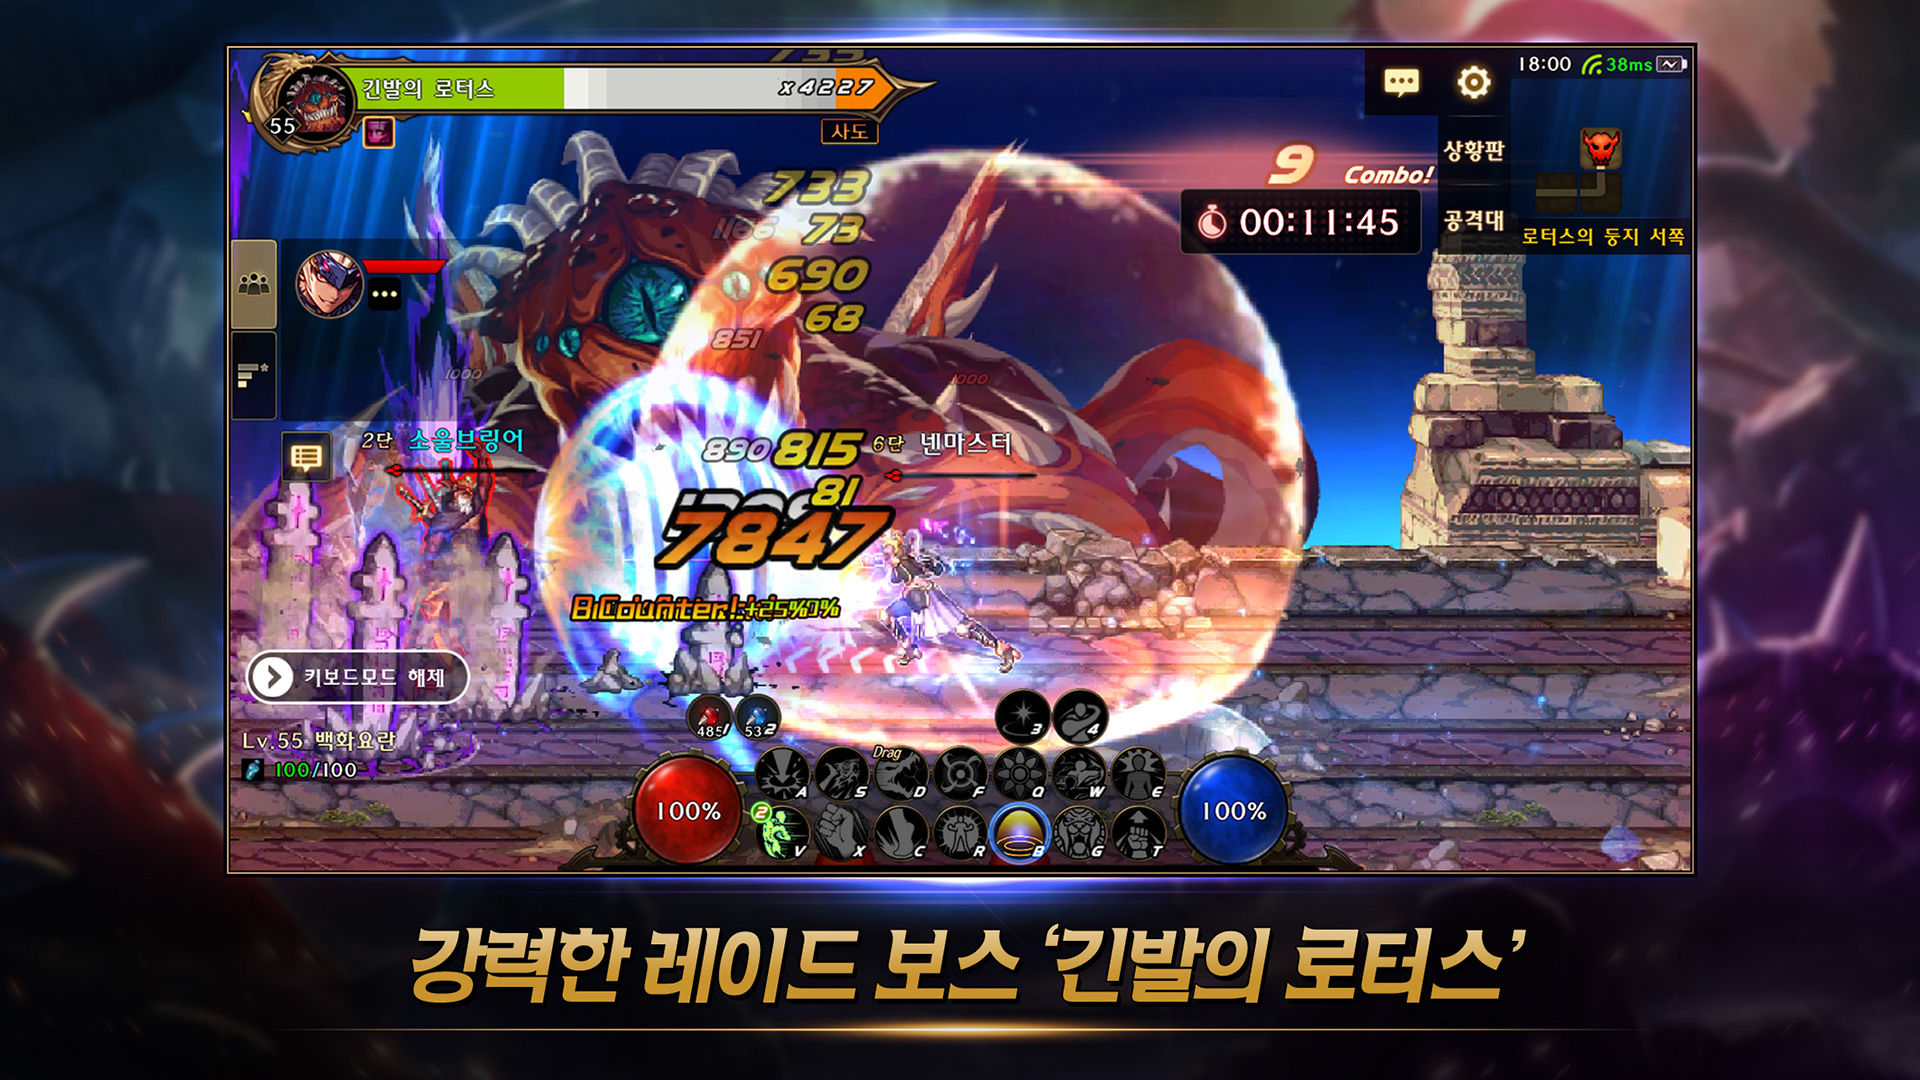 Screenshot of Dungeon & Fighter Mobile